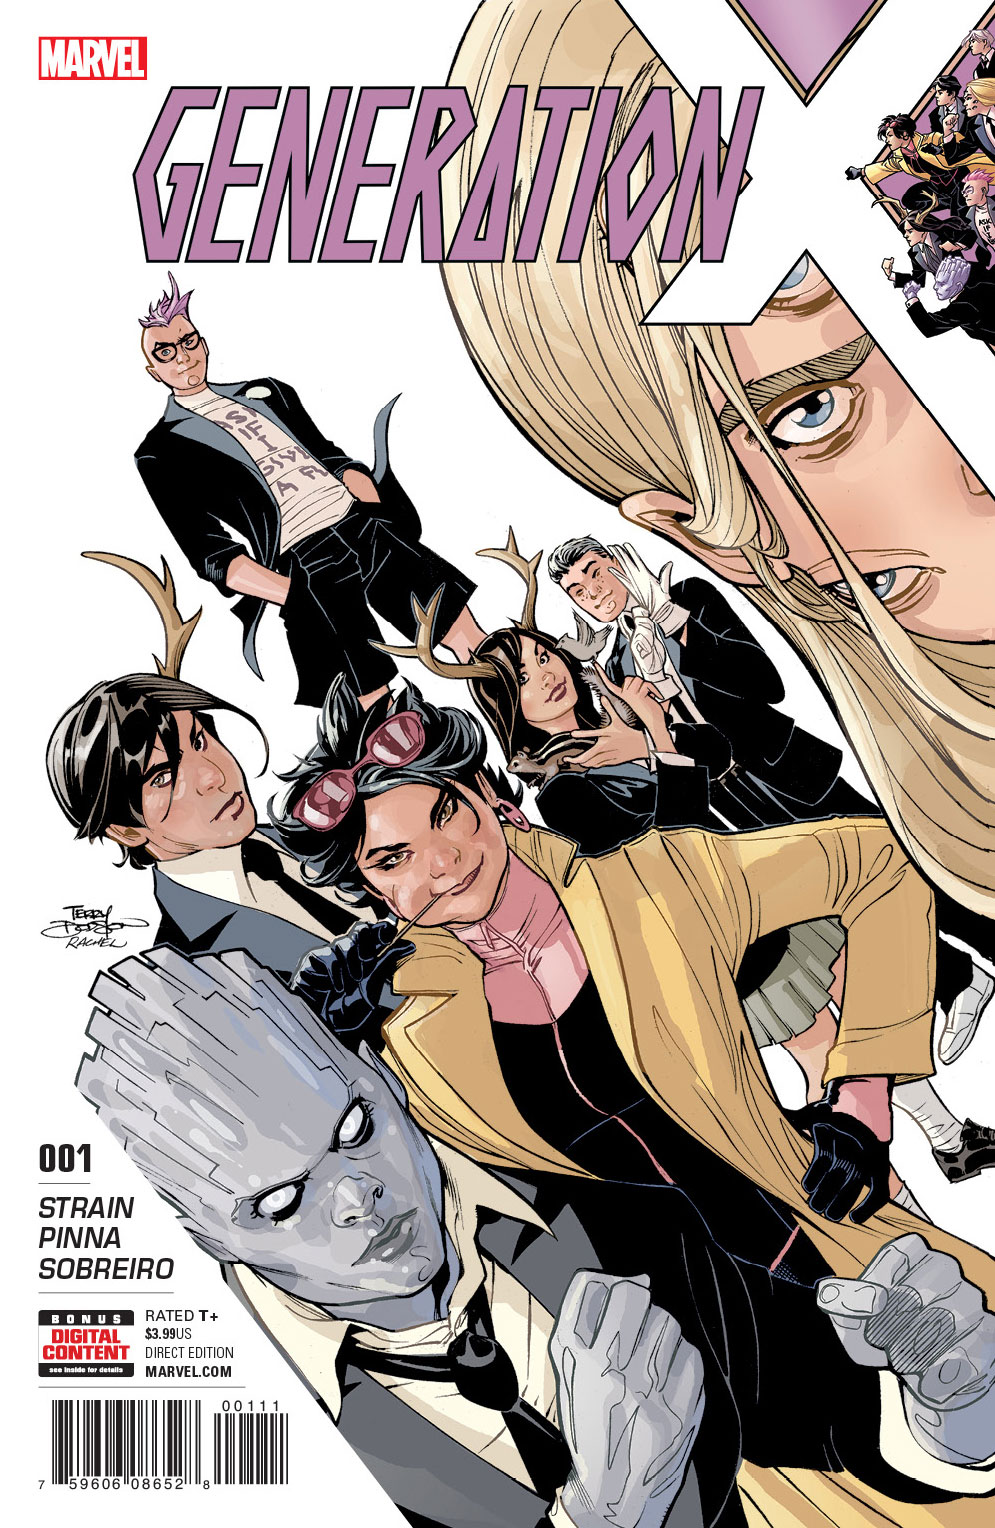 Marvel Preview: Generation X #1